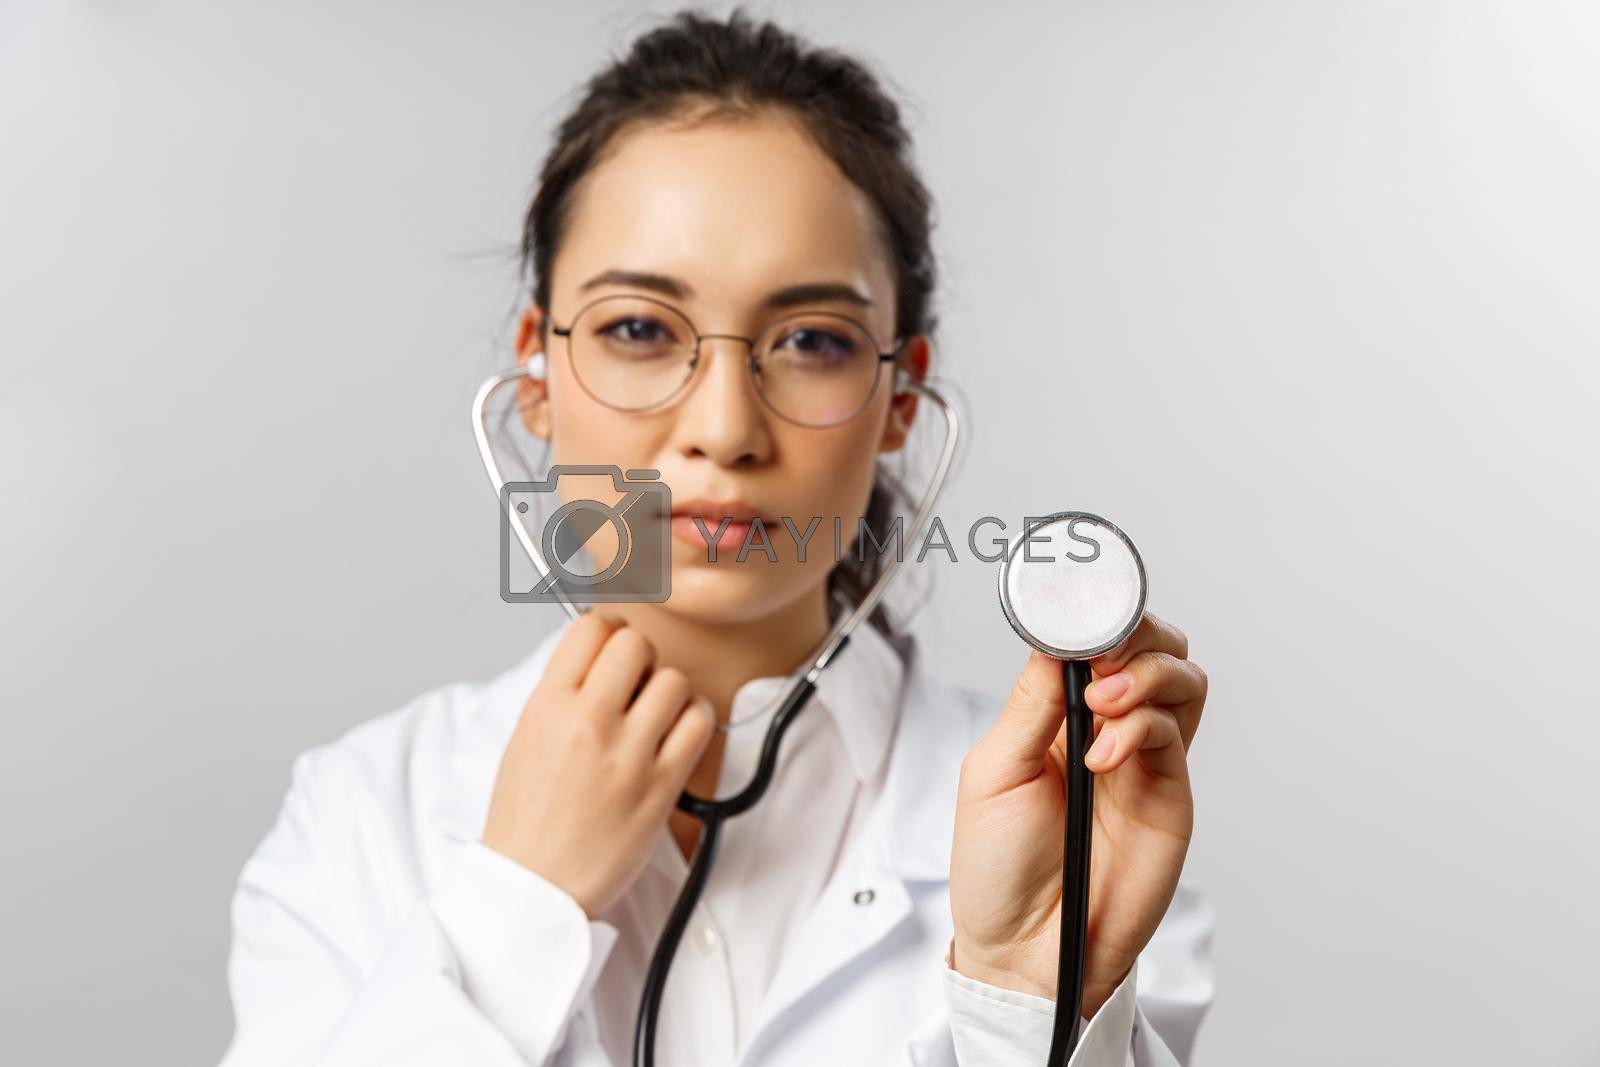 Royalty free image of Covid19, coronavirus, healthcare and doctors concept. Portrait of serious-looking female doctor during check-up of patient in ER, hospital, wearing white coat, listening to lungs with stethoscope by Benzoix